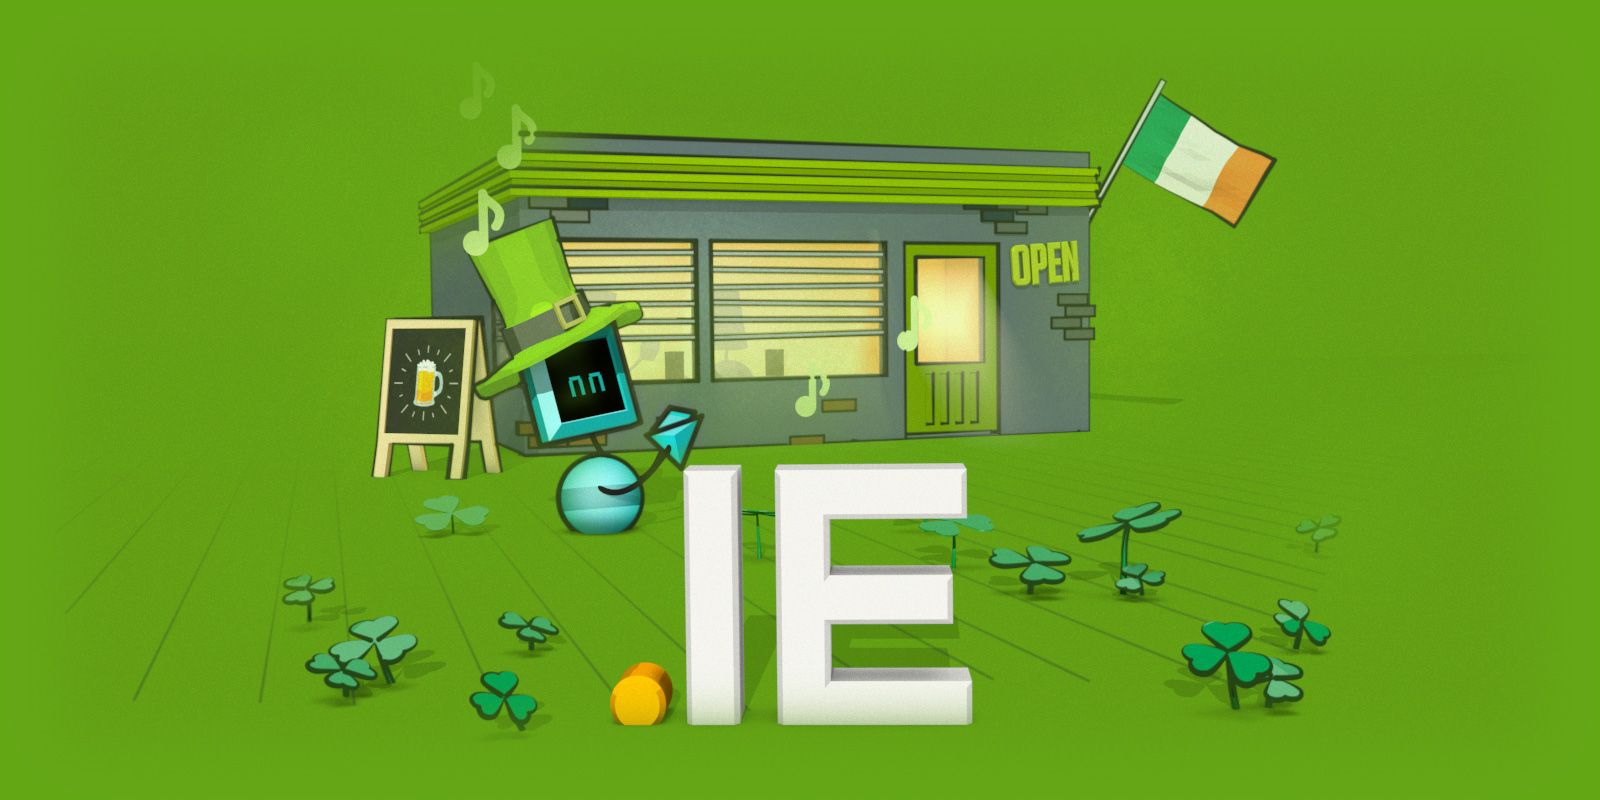 After opening to non-corporate customers, .IE is on sale